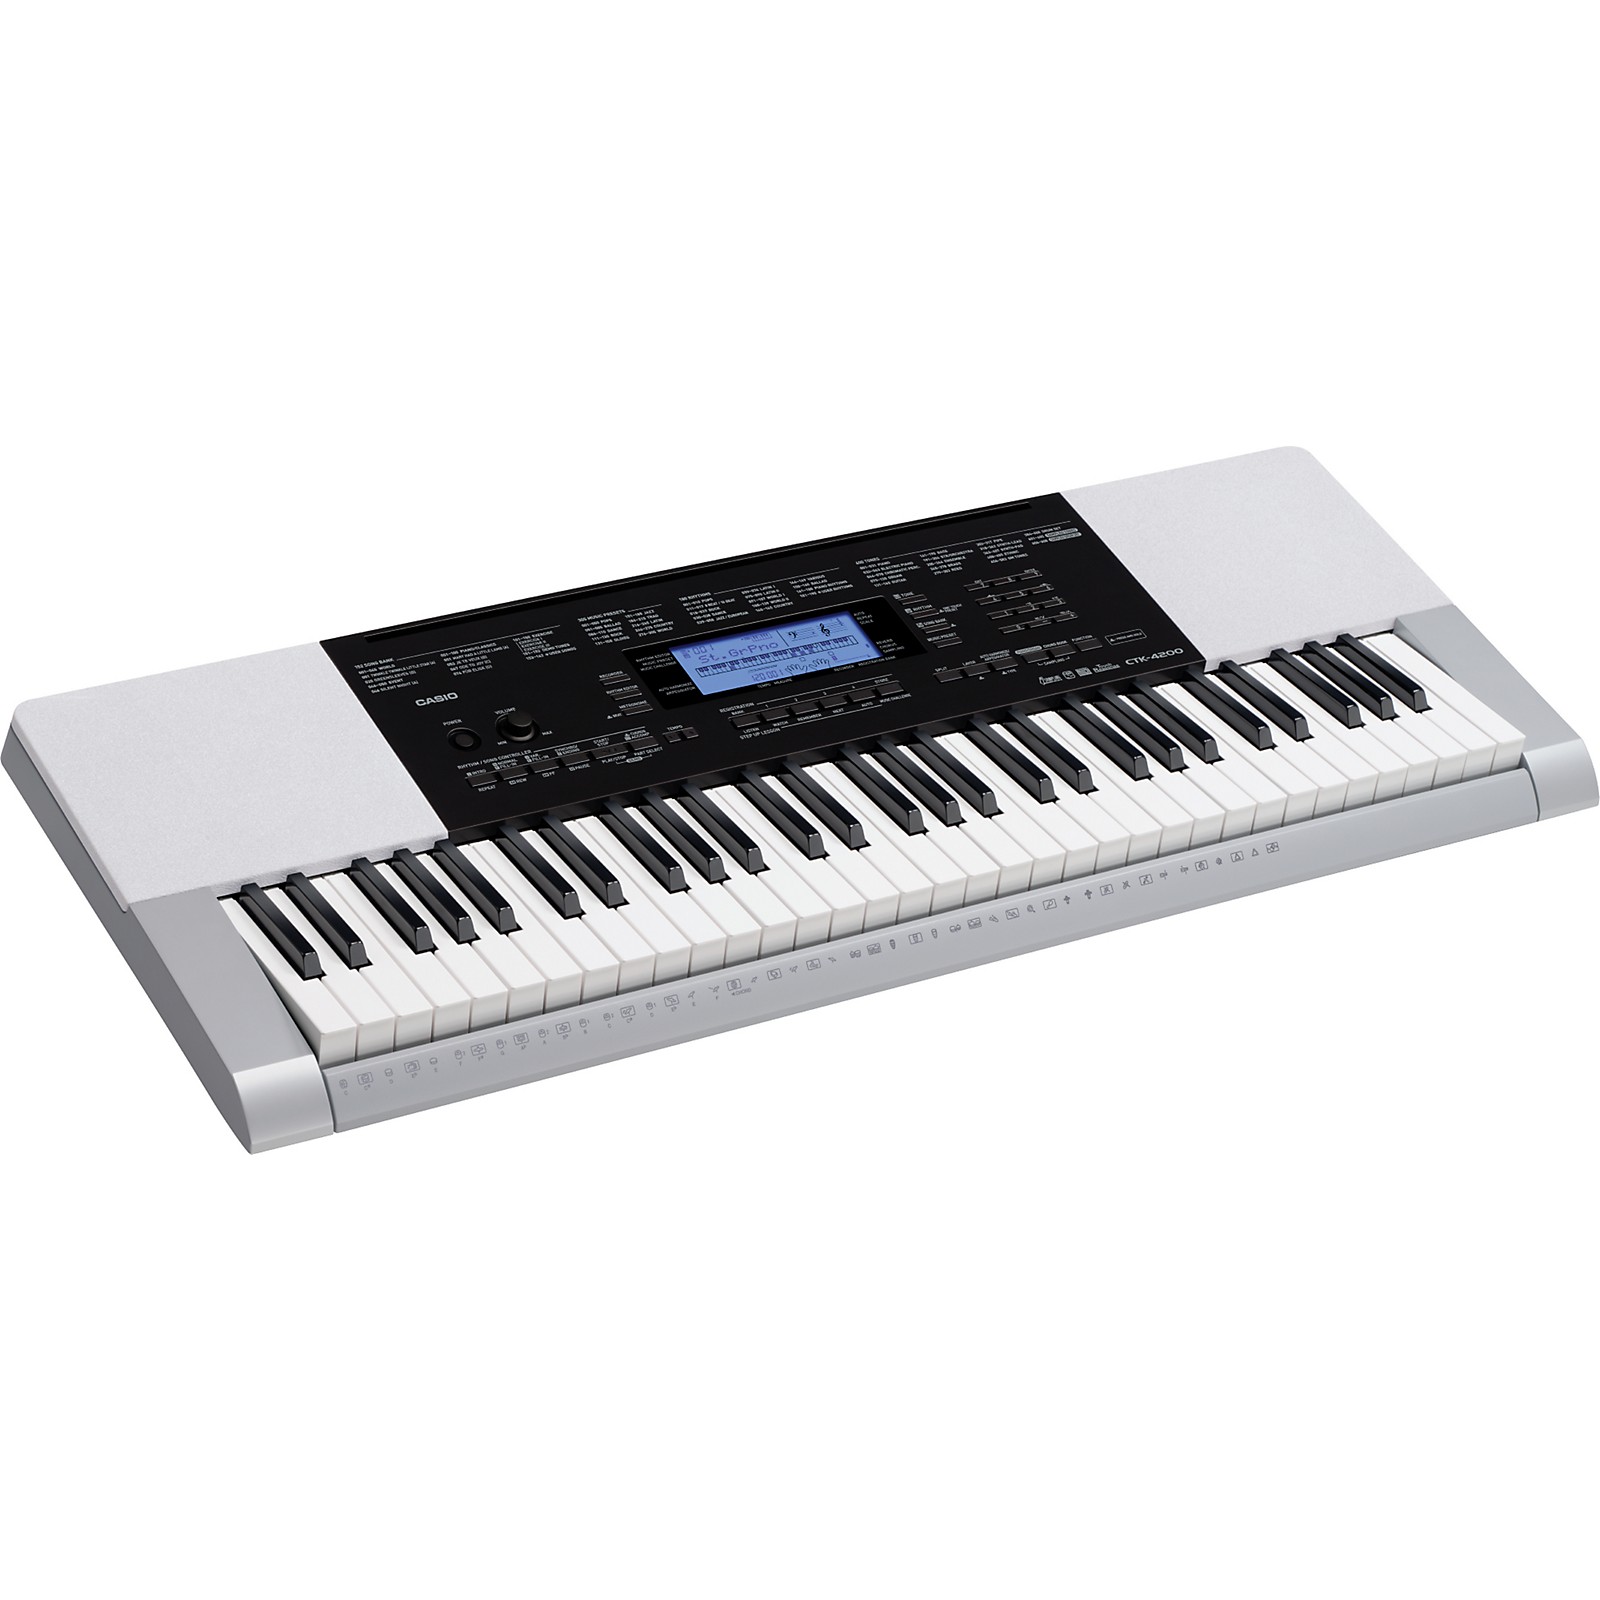 download how to use casio ctk 574 keyboard as a midi controller native instruments maschine mk2